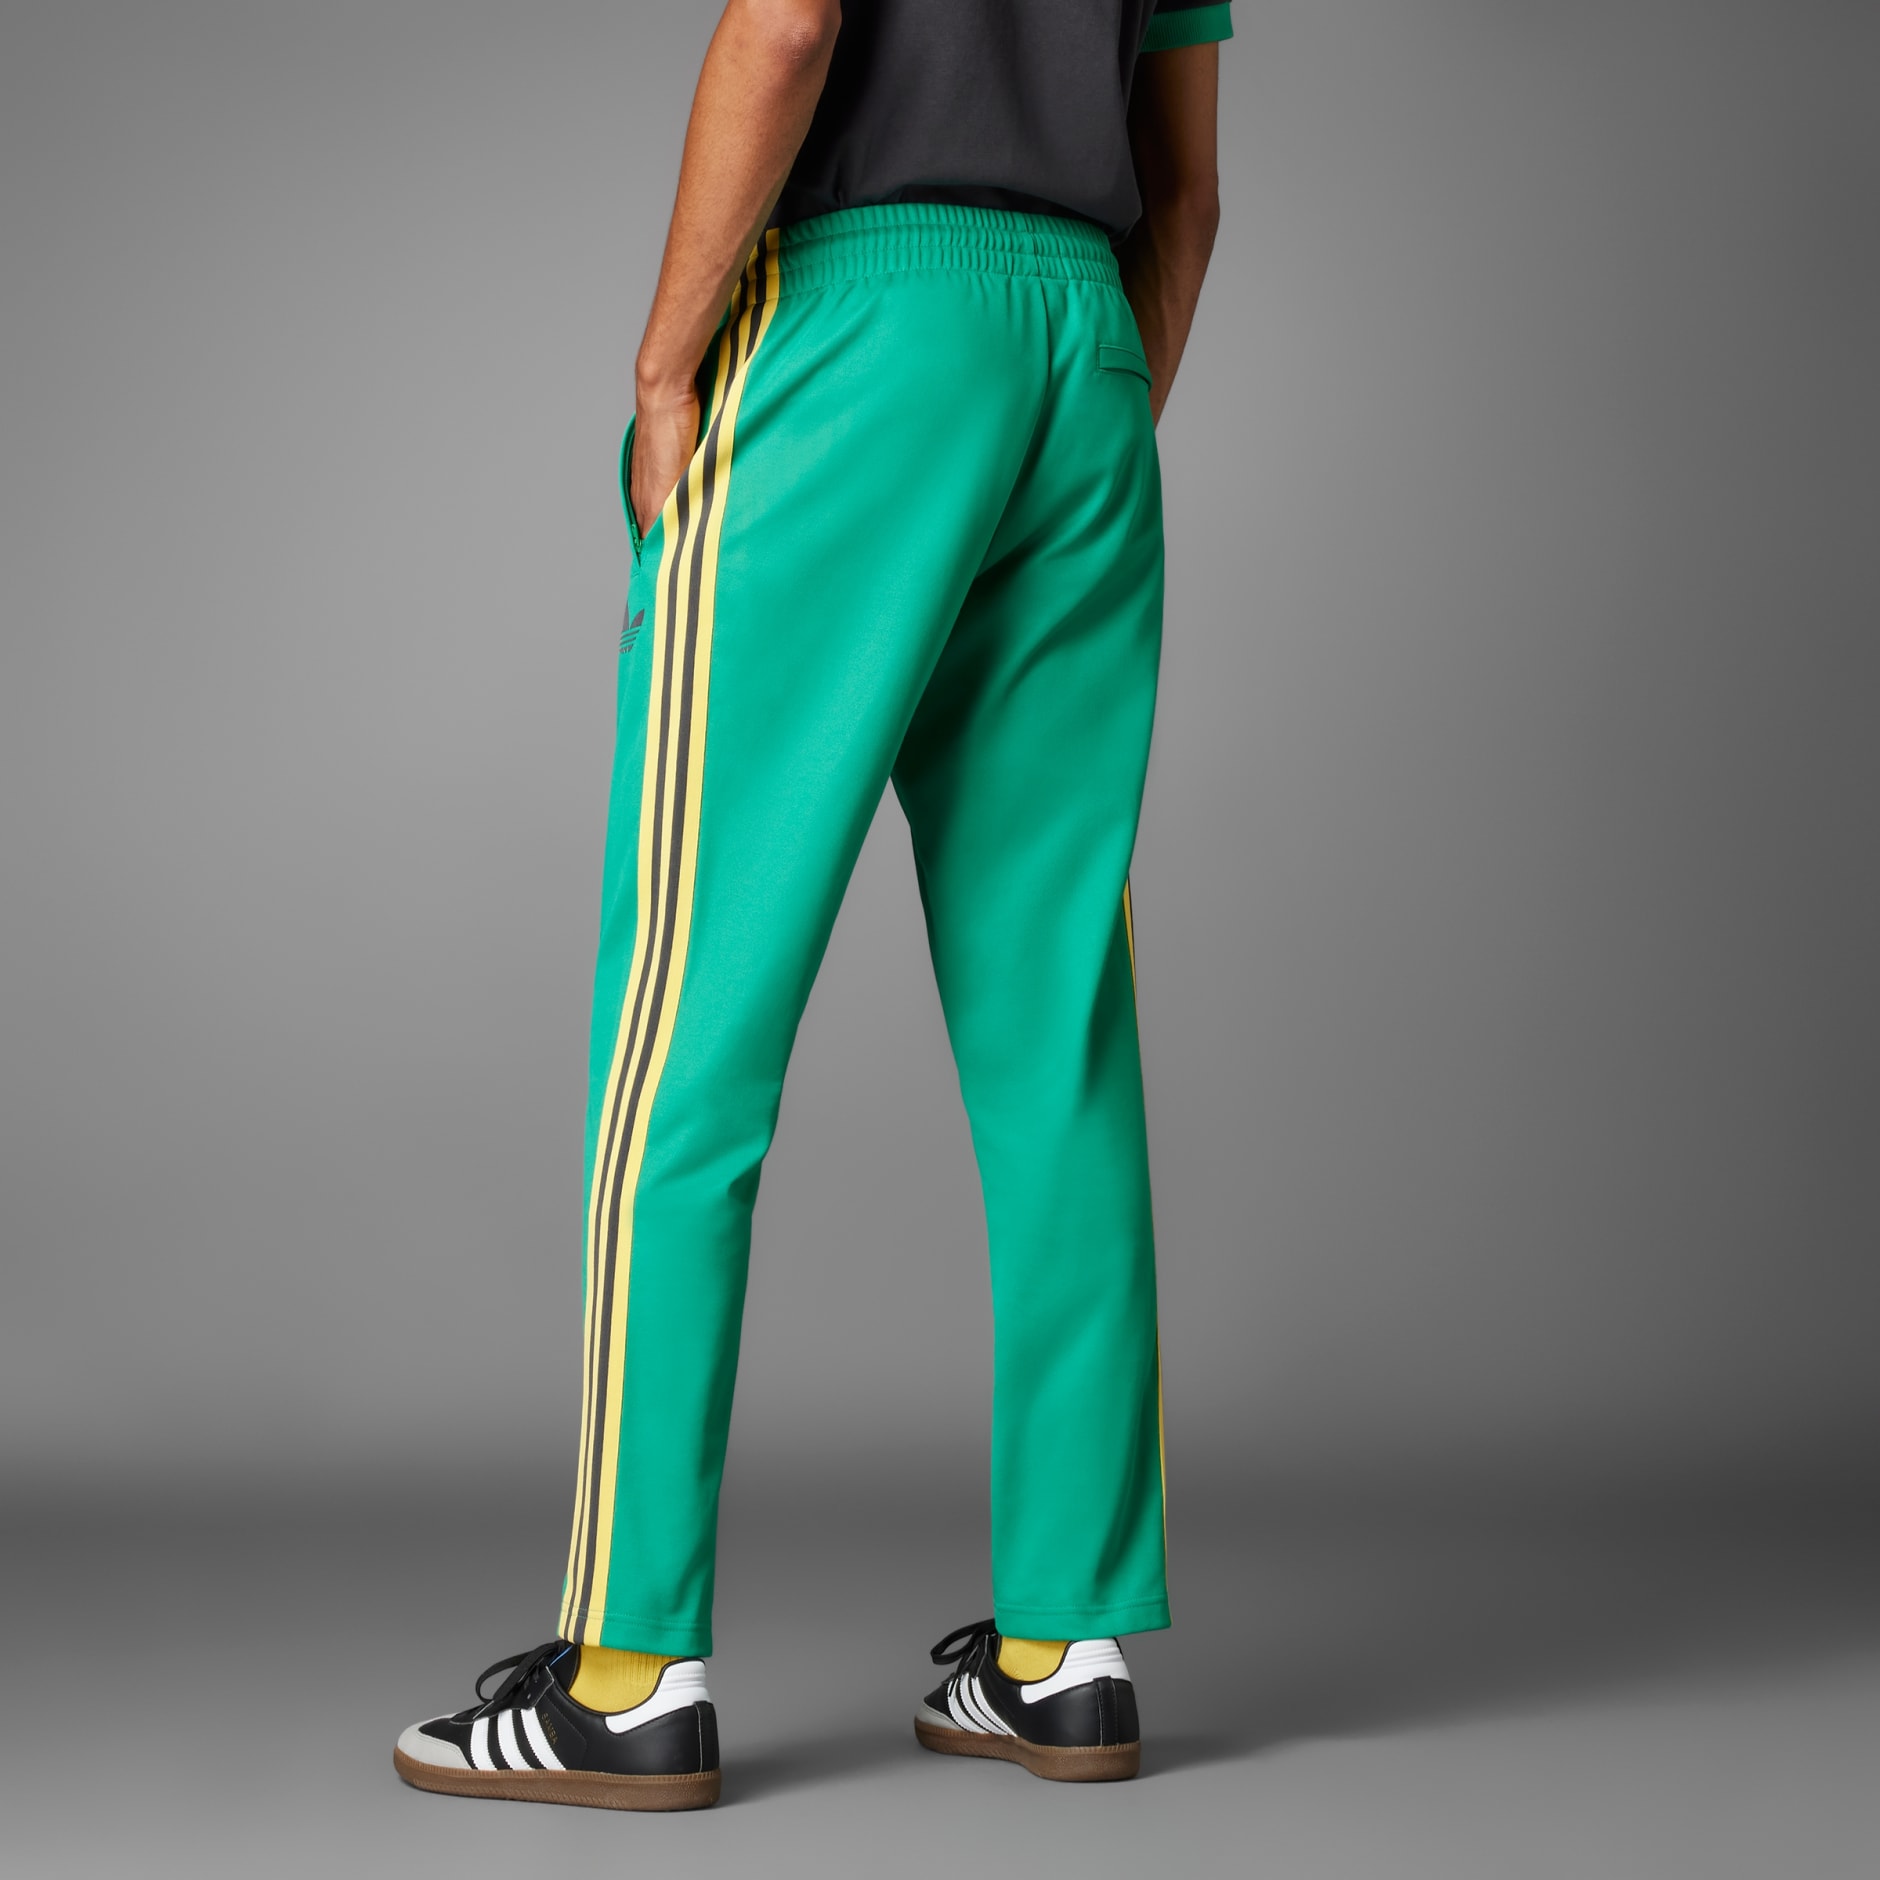 adidas Originals retro beckenbauer track pants in green and yellow